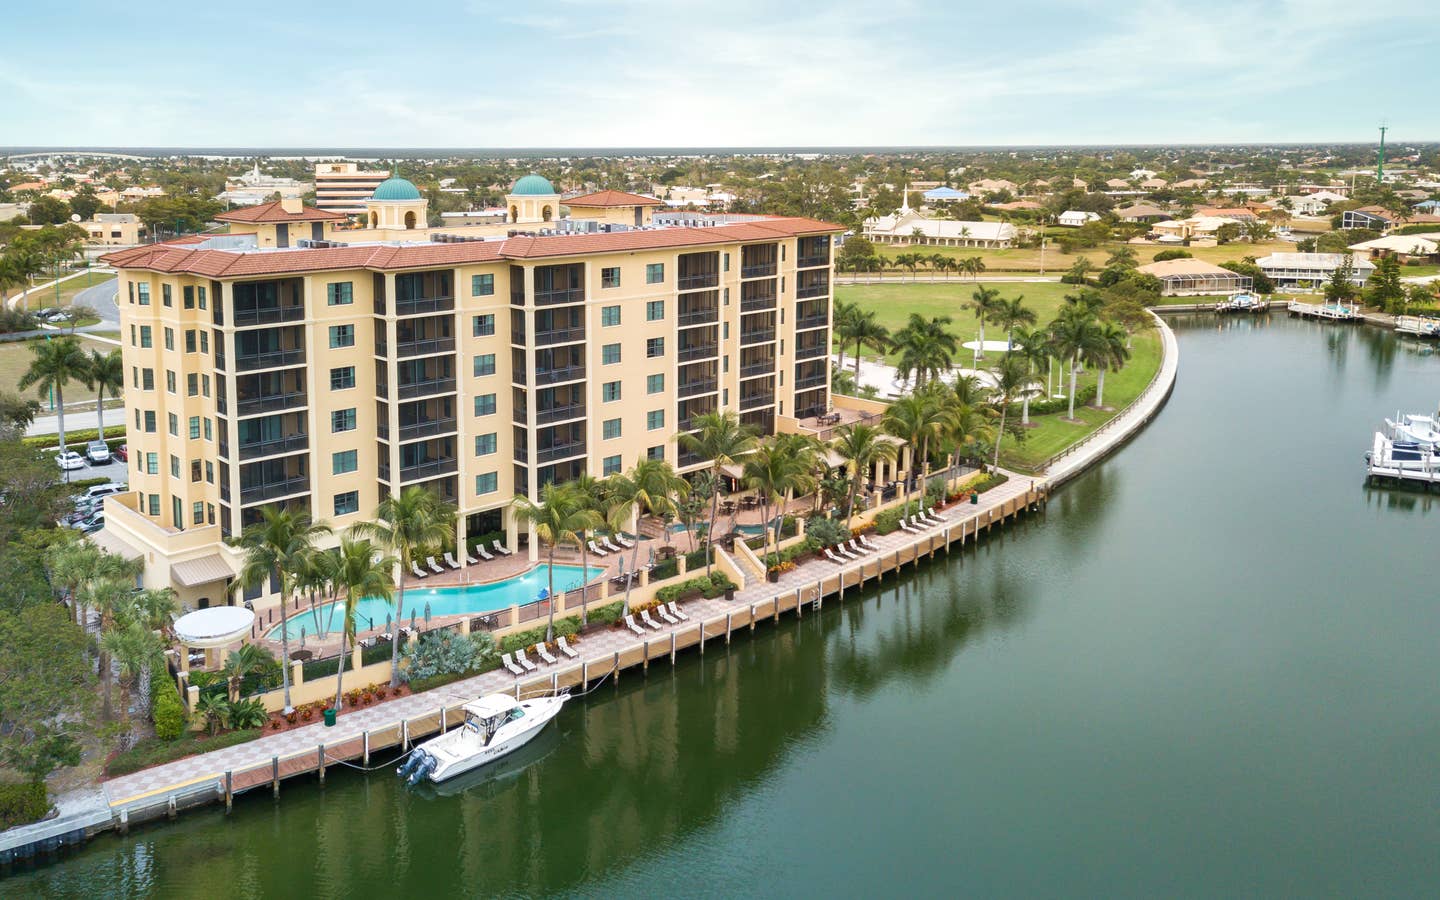 Aerial view of Sunset Cove Resort in Marco Island, FL